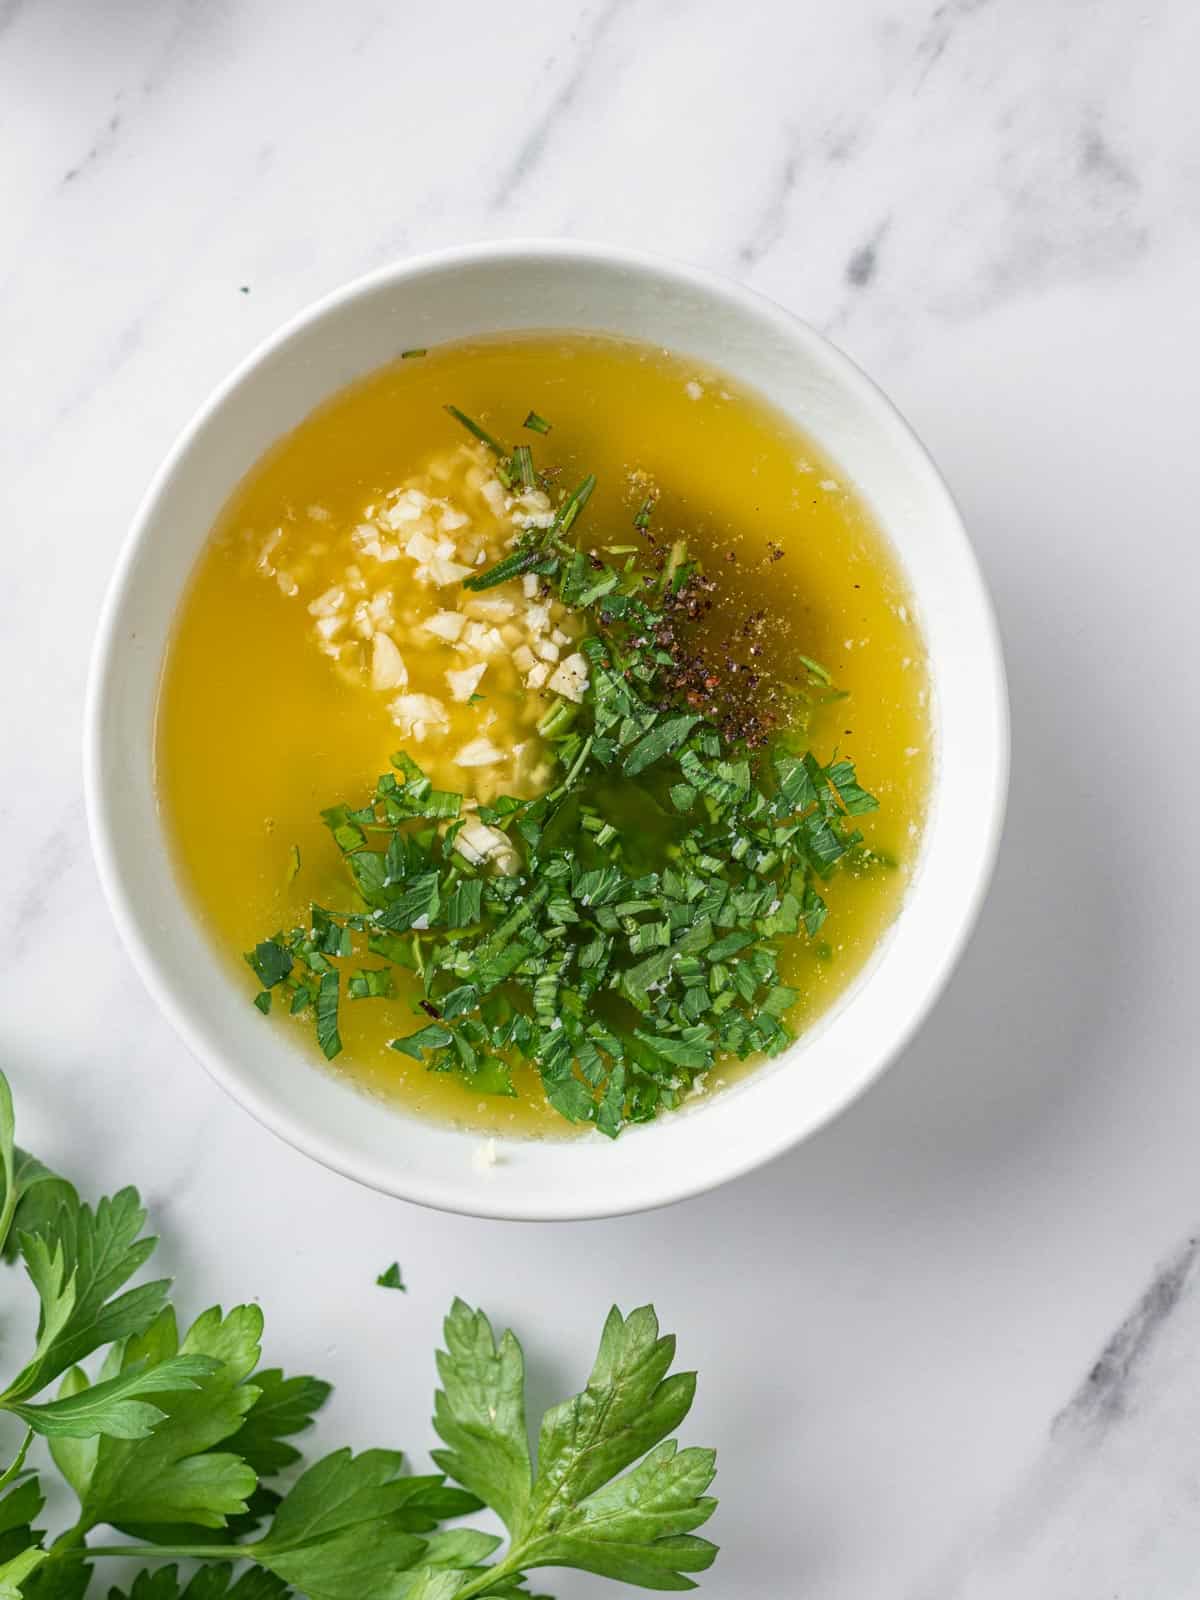 Melted butter with herbs.